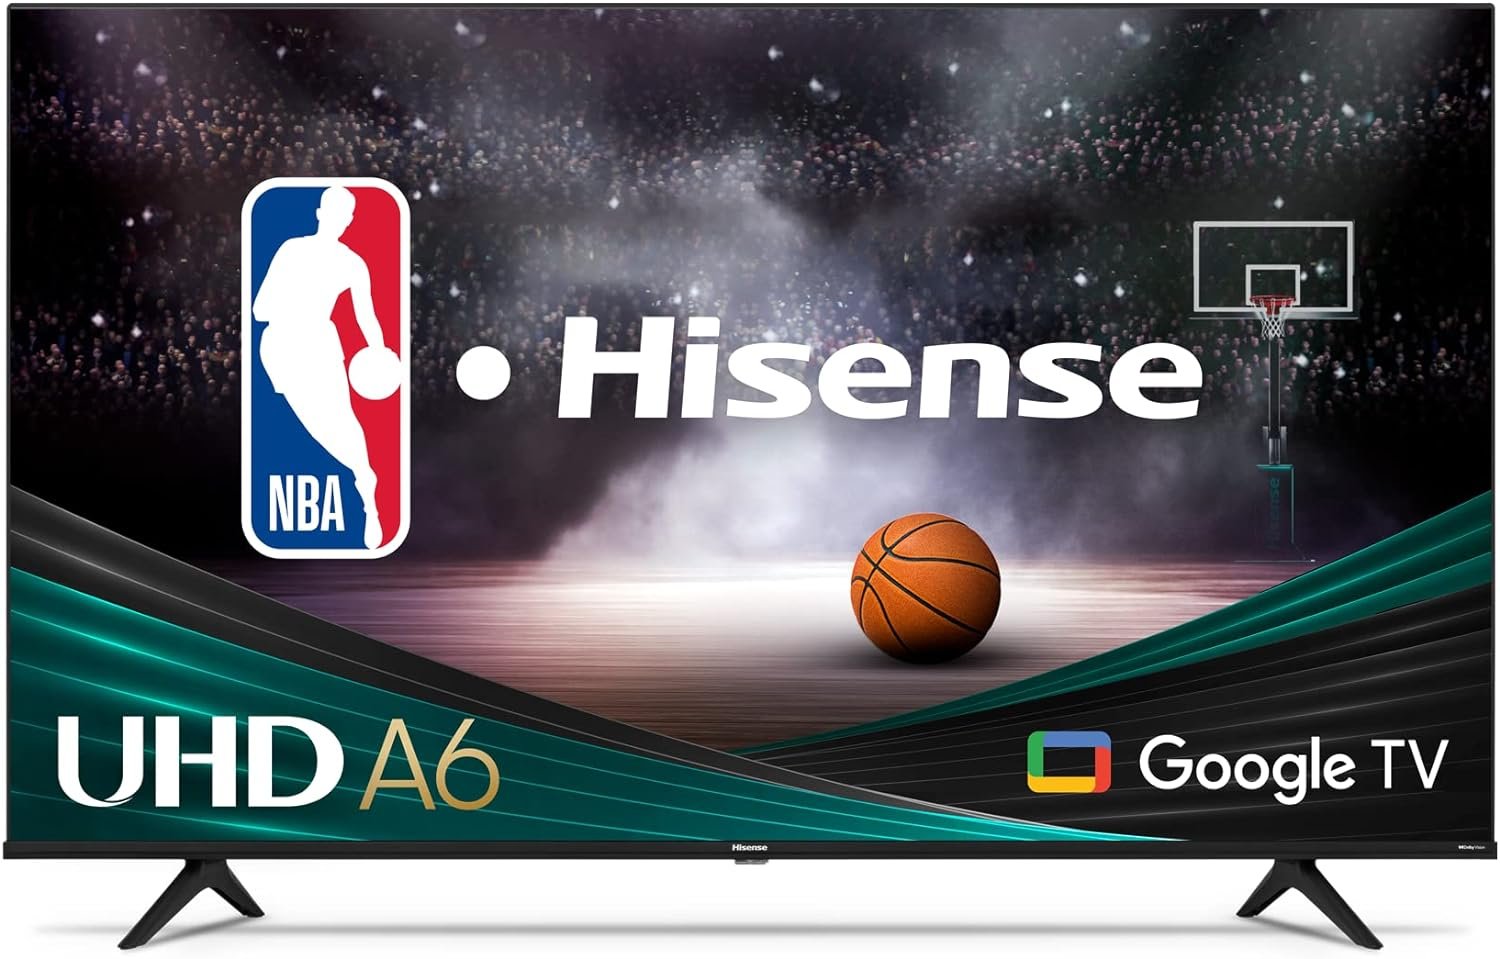 Hisense 50-Inch Class A6 Series 4K UHD Smart Google TV with Alexa Compatibility, Dolby Vision HDR, DTS Virtual X, Sports & Game Modes, Voice Remote, Chromecast Built-in (50A6H